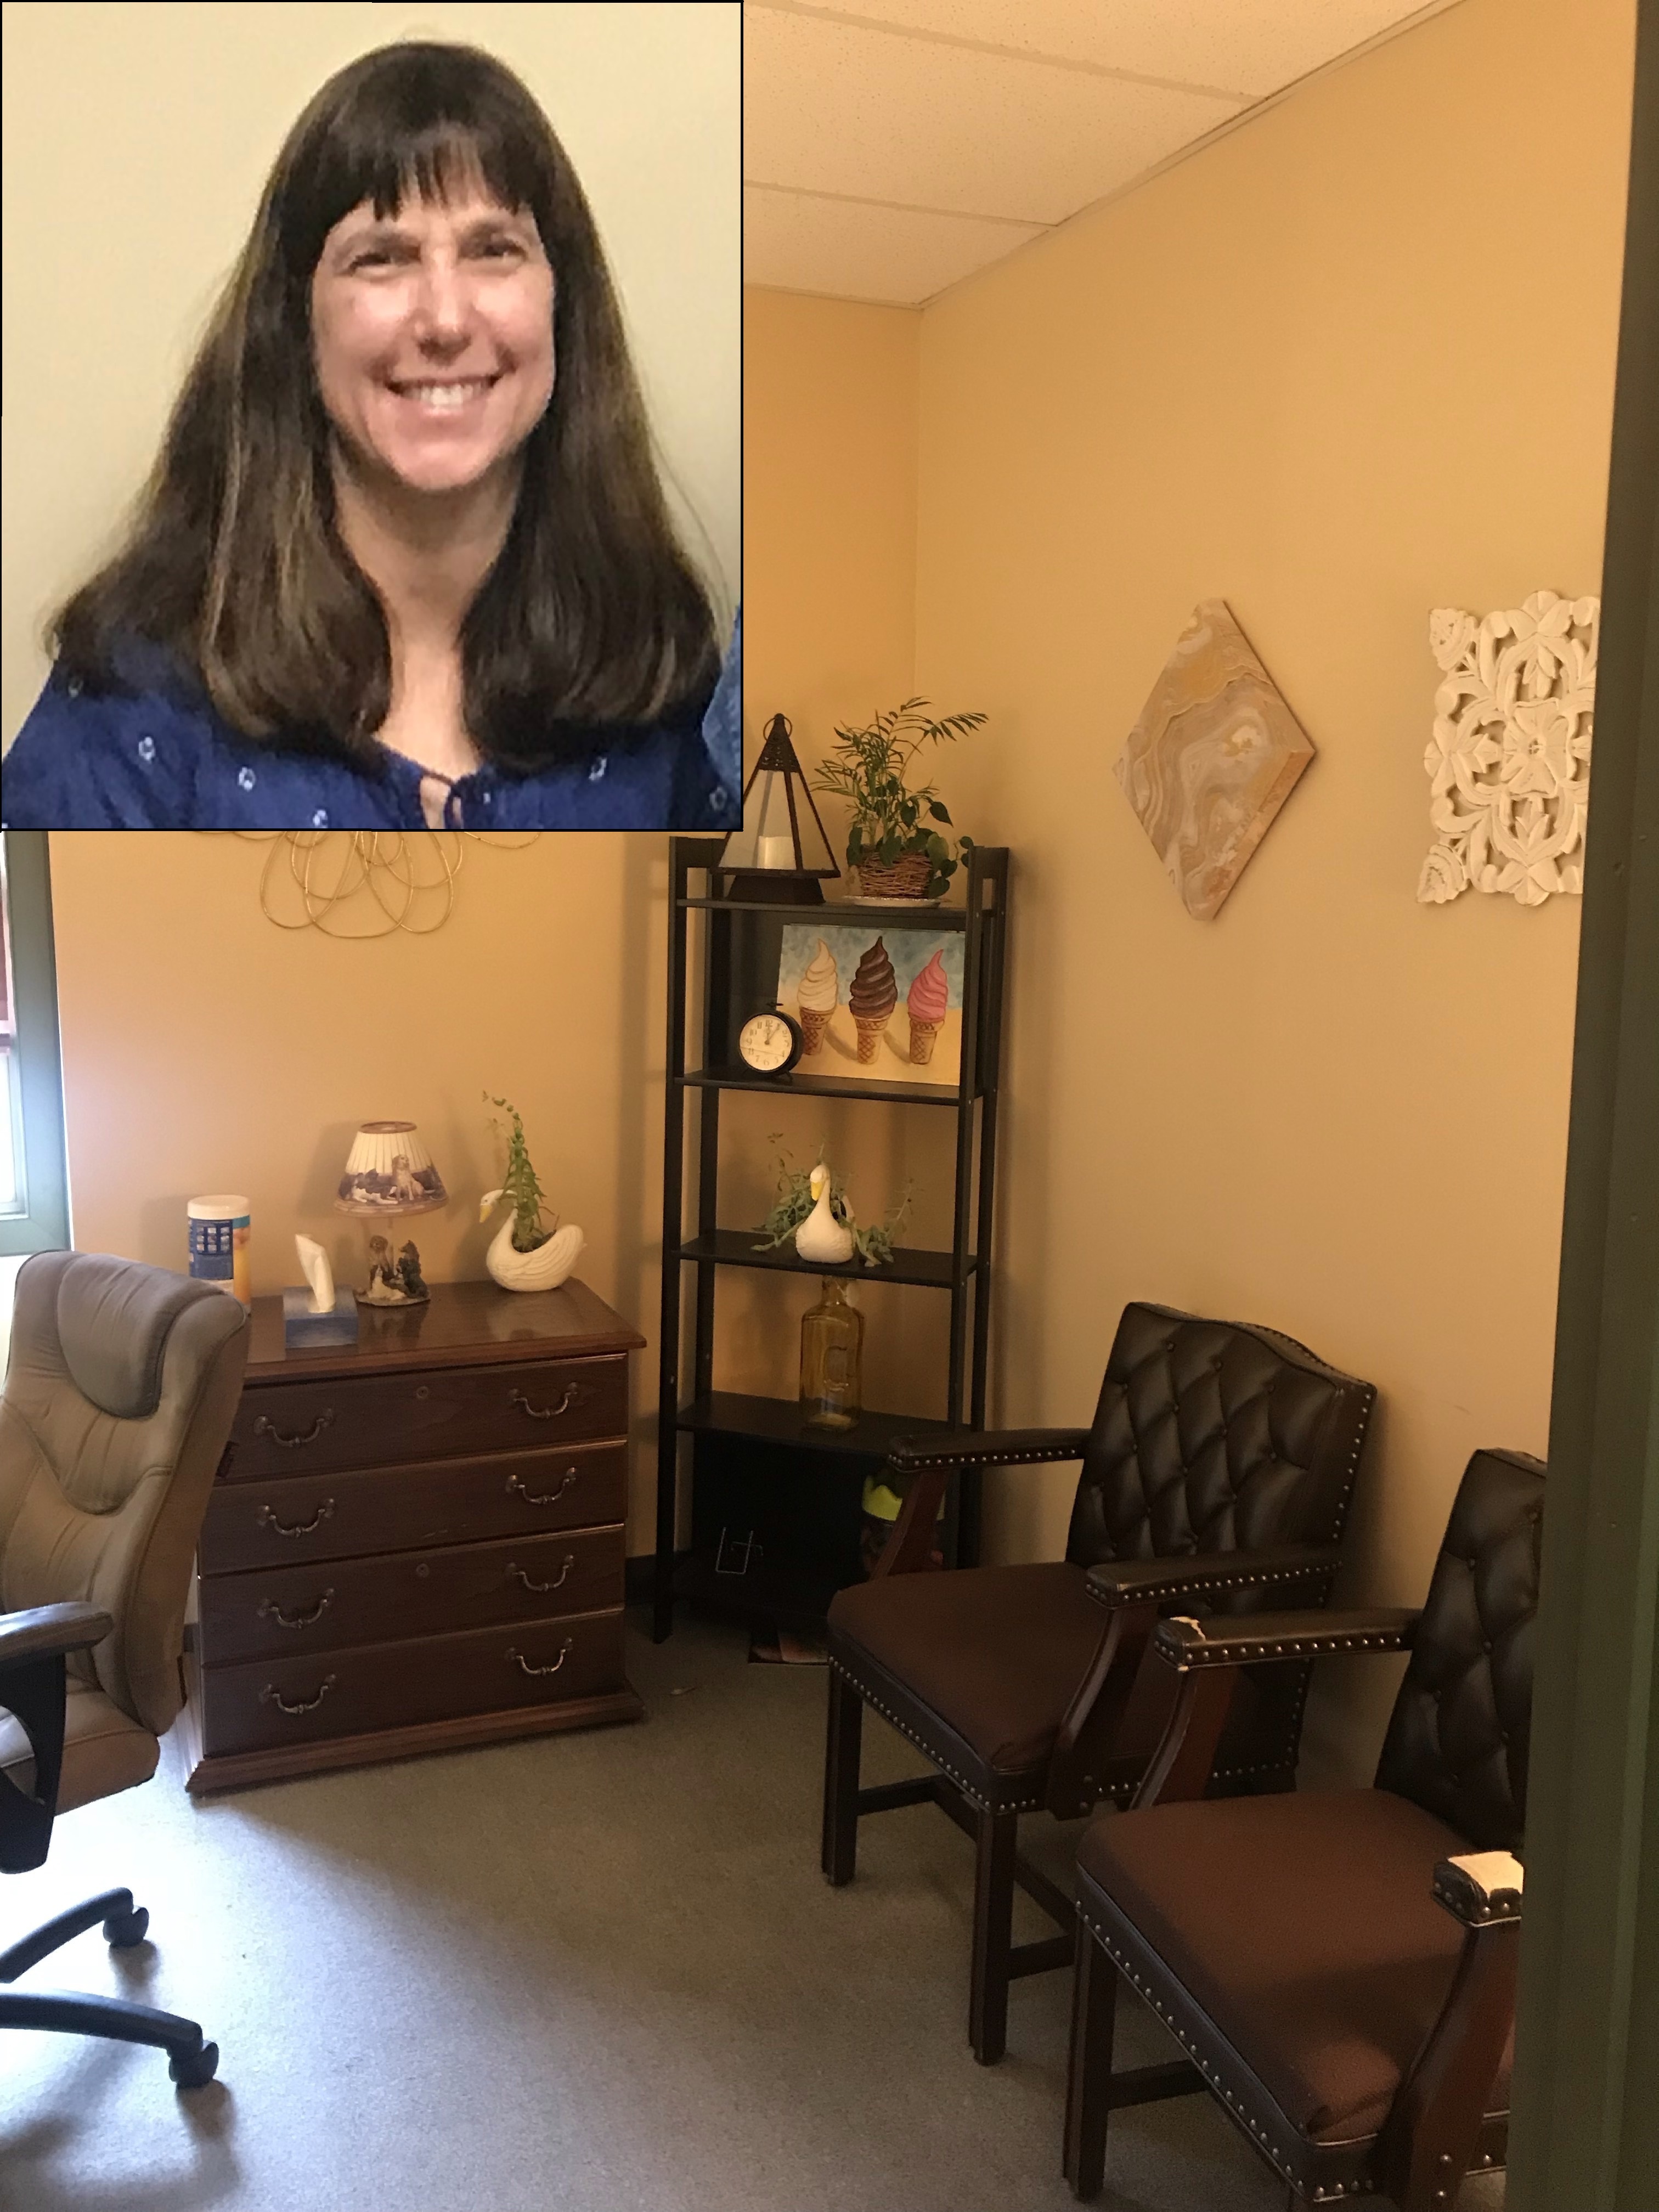  Stacey Moyer and her office interior.